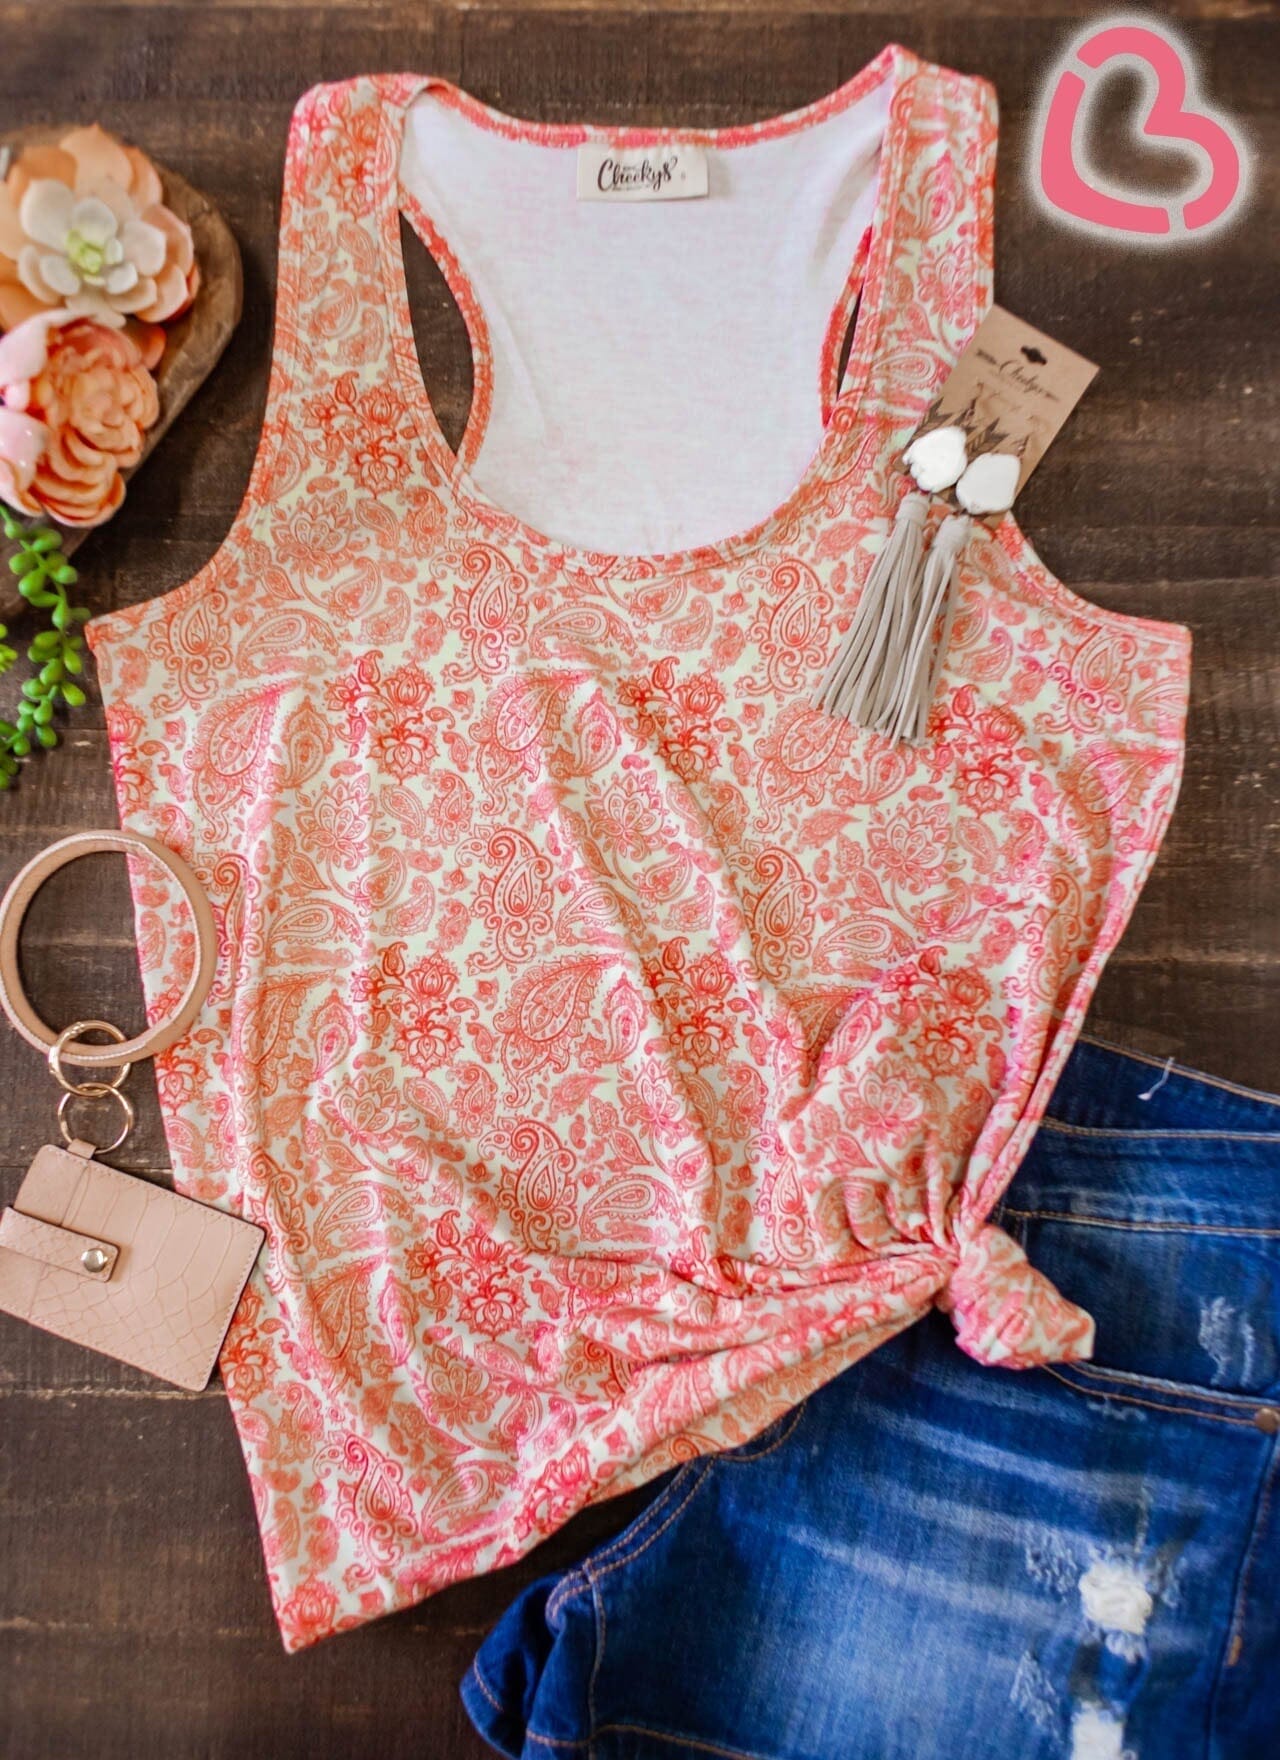 The Madelyn Paisley Tank In Peaches and Cream Cheekys Apparel 23 